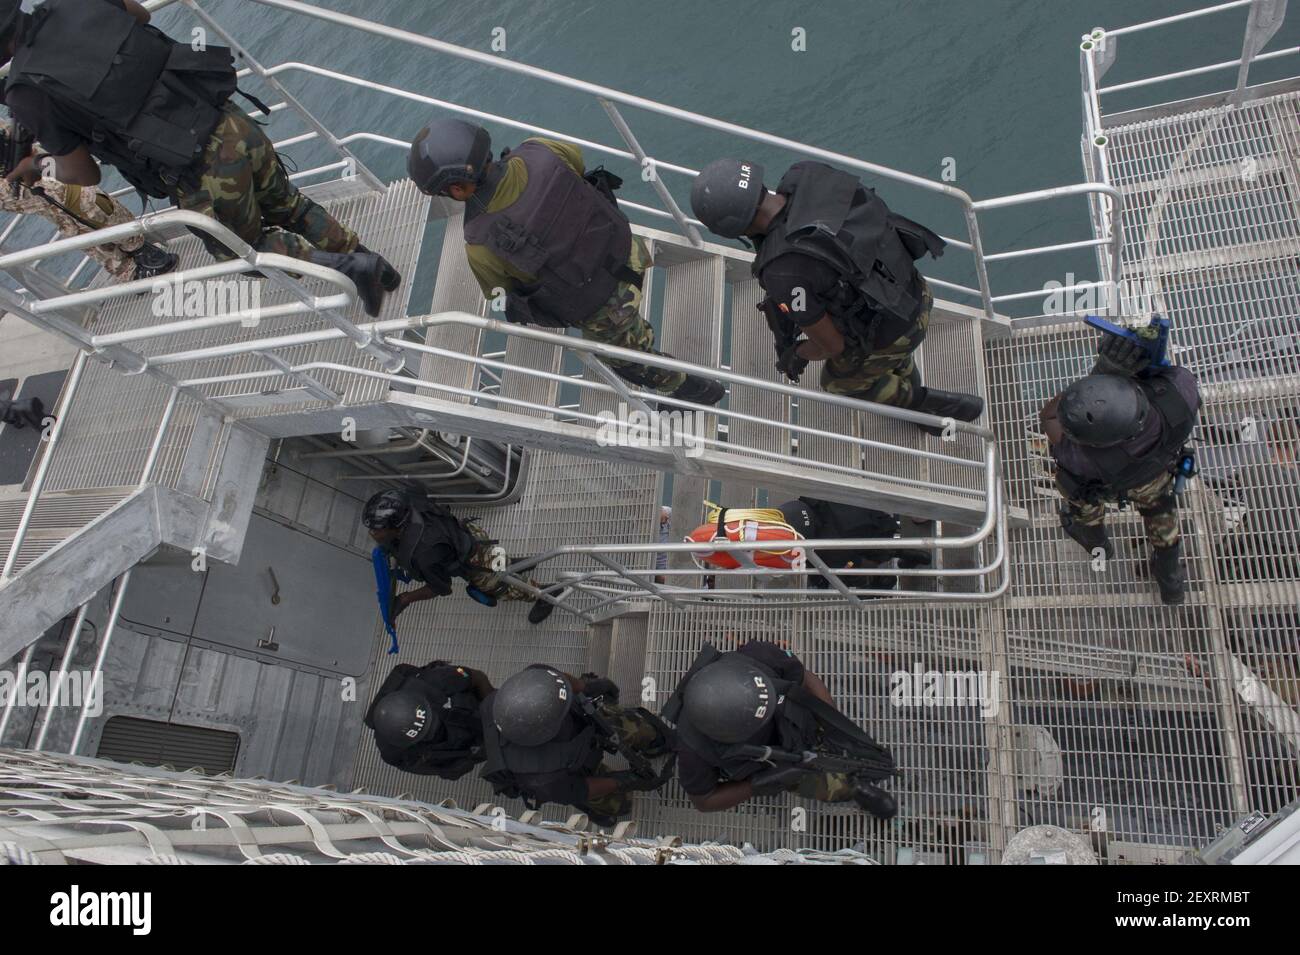 Nigerian sailors with the Special Boat Service and Cameroonian soldiers with the Rapid Intervention Battalion conduct a simulated boarding aboard the joint high speed vessel USNS Spearhead (JHSV 1) in the Gulf of Guinea April 20, 2014, during Obangame Express 2014. Obangame Express is a maritime exercise conducted by U.S. Naval Forces Africa to improve cooperation among African partner nations in order to increase safety and security in the Gulf of Guinea. (Photo by Mass Communication Specialist Seaman Justin R. DiNiro, U.S. Navy/DoD/Sipa USA) Stock Photo